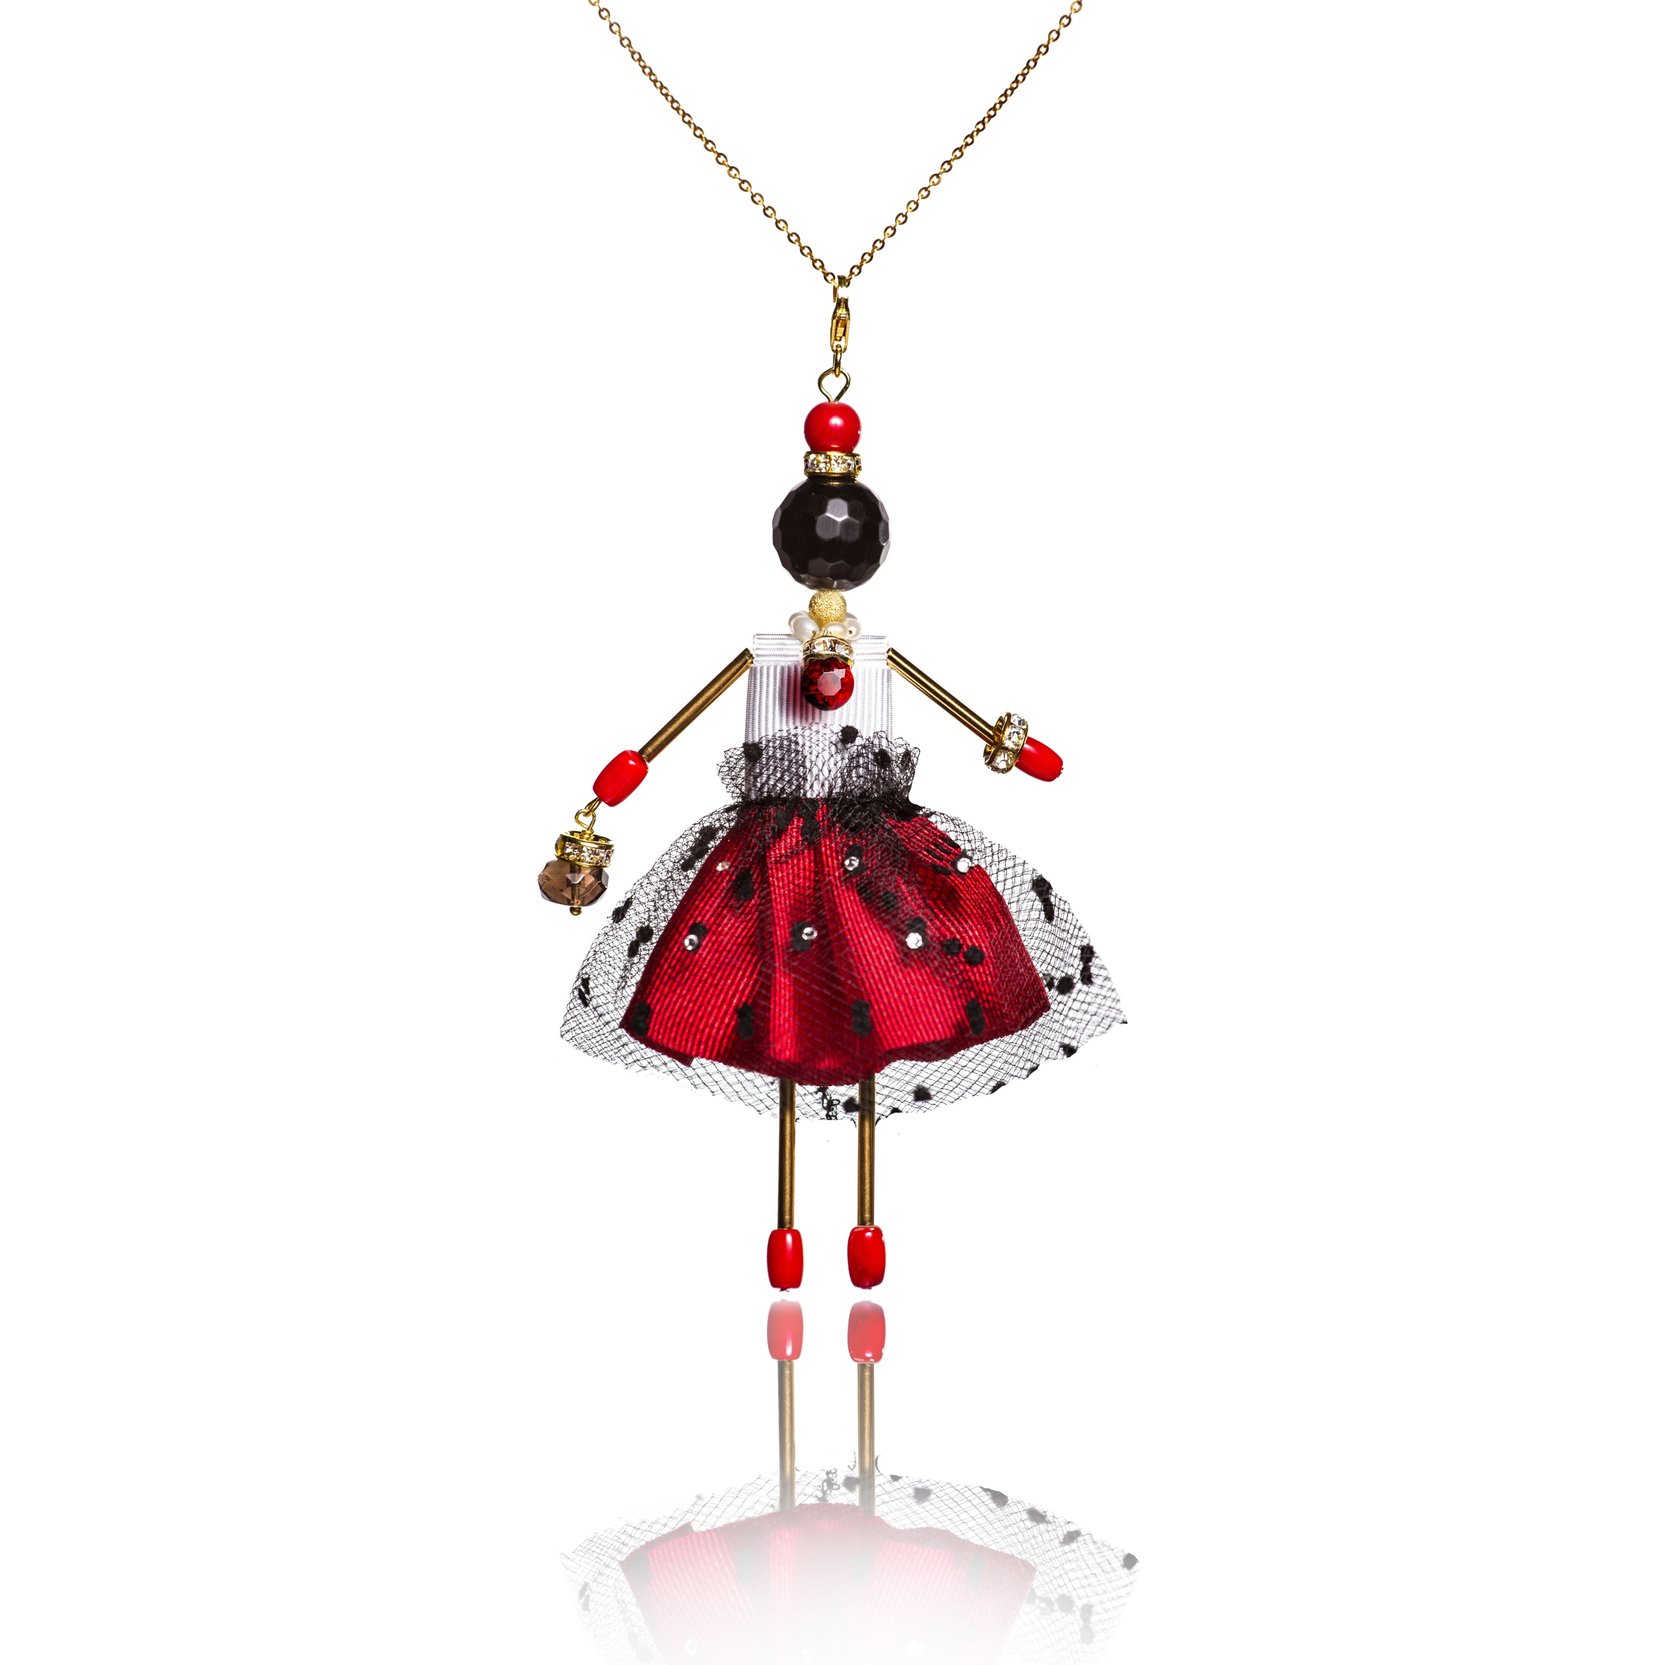 Doll Pendant of the collection "Celebration"